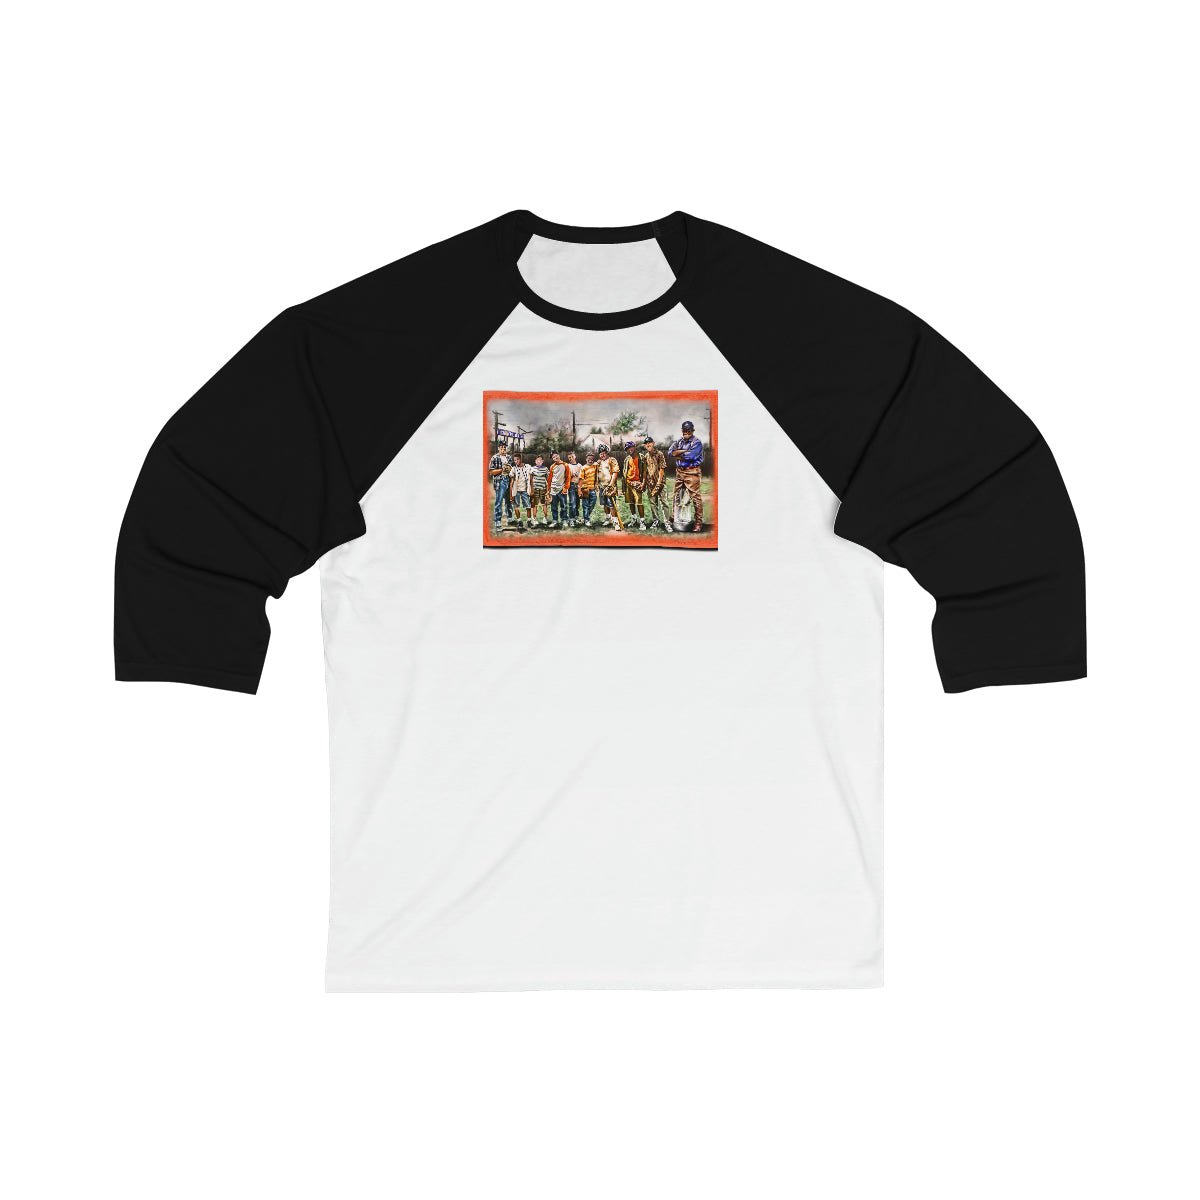 FOR-HOU-STON | Unisex 3\4 Sleeve Tee - Androo's Art